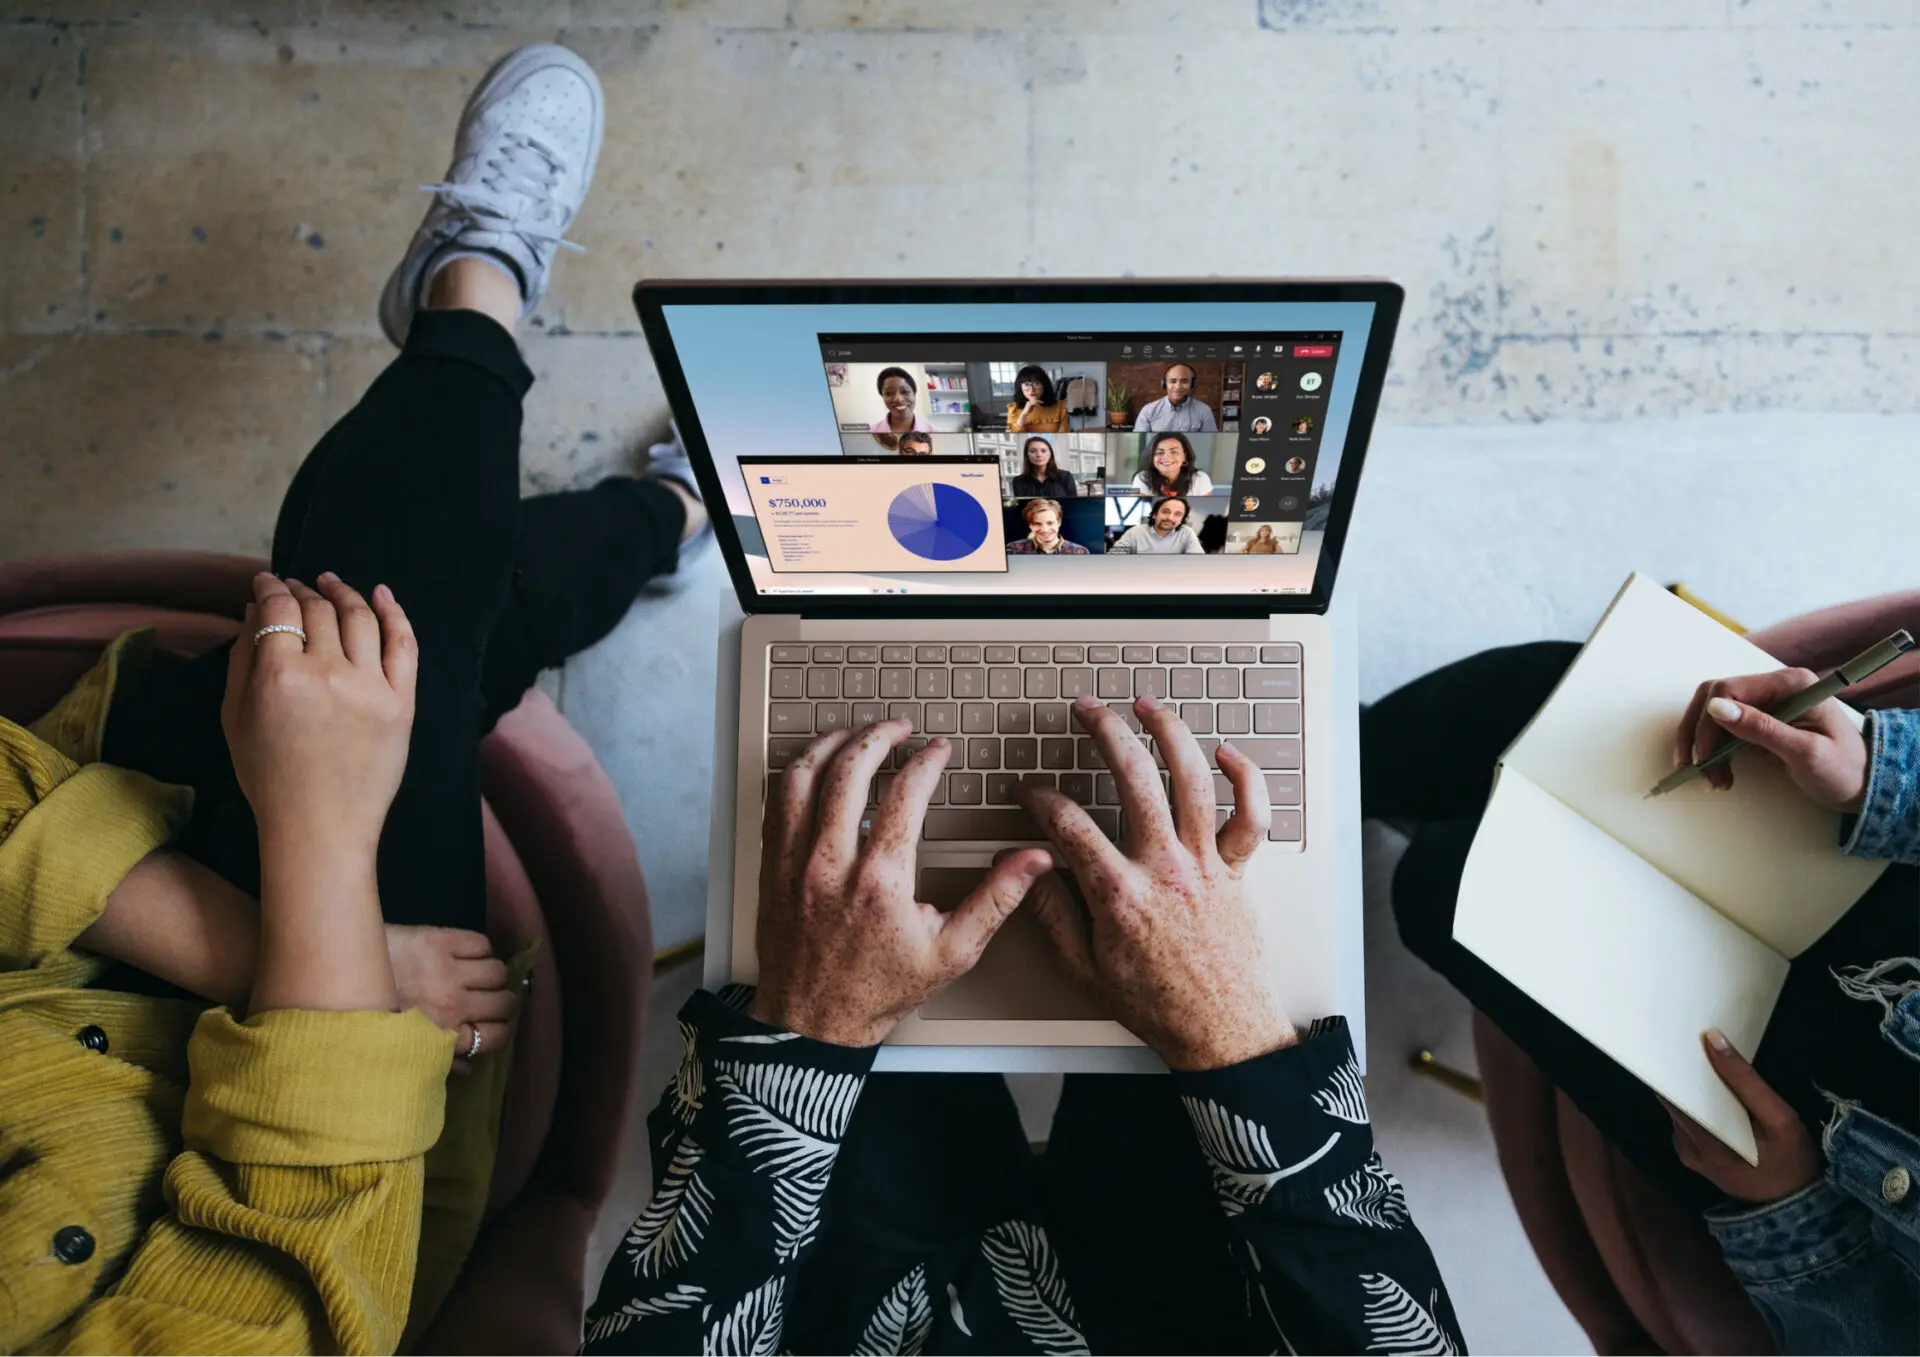 Laptop in the hands of a man near the other people on a Microsoft Teams Video Call